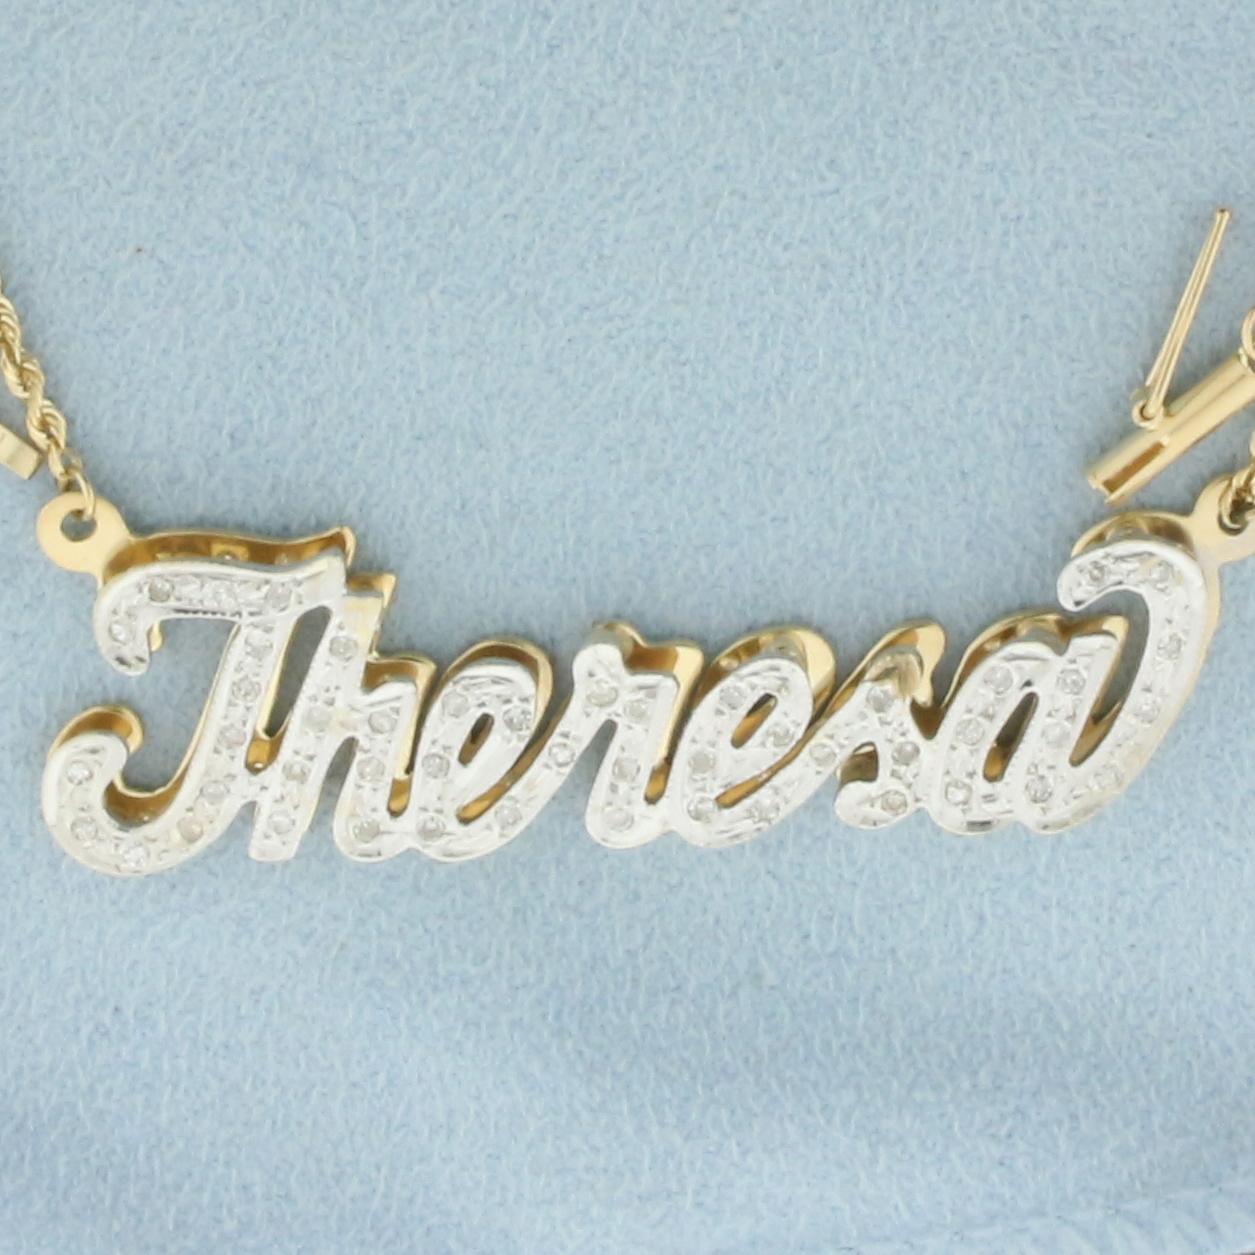 Theresa Nameplate Diamond Necklace In 14k Yellow Gold